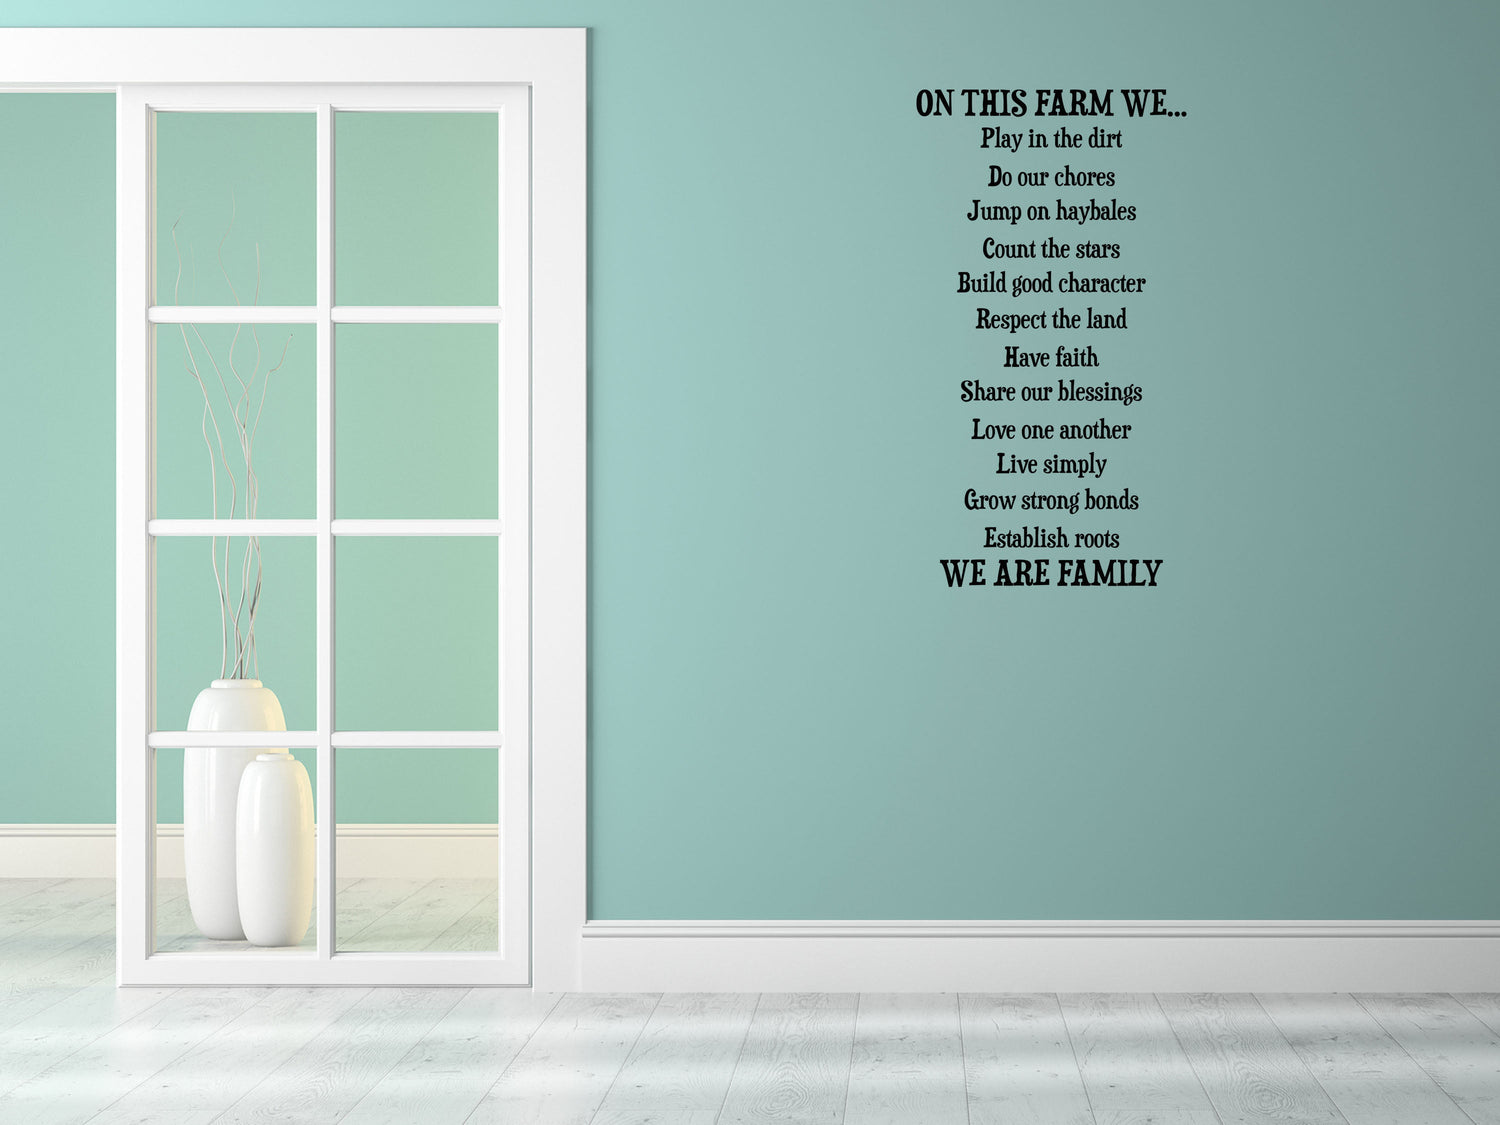 On This Farm - Inspirational Wall Decals Vinyl Wall Decal Inspirational Wall Signs 